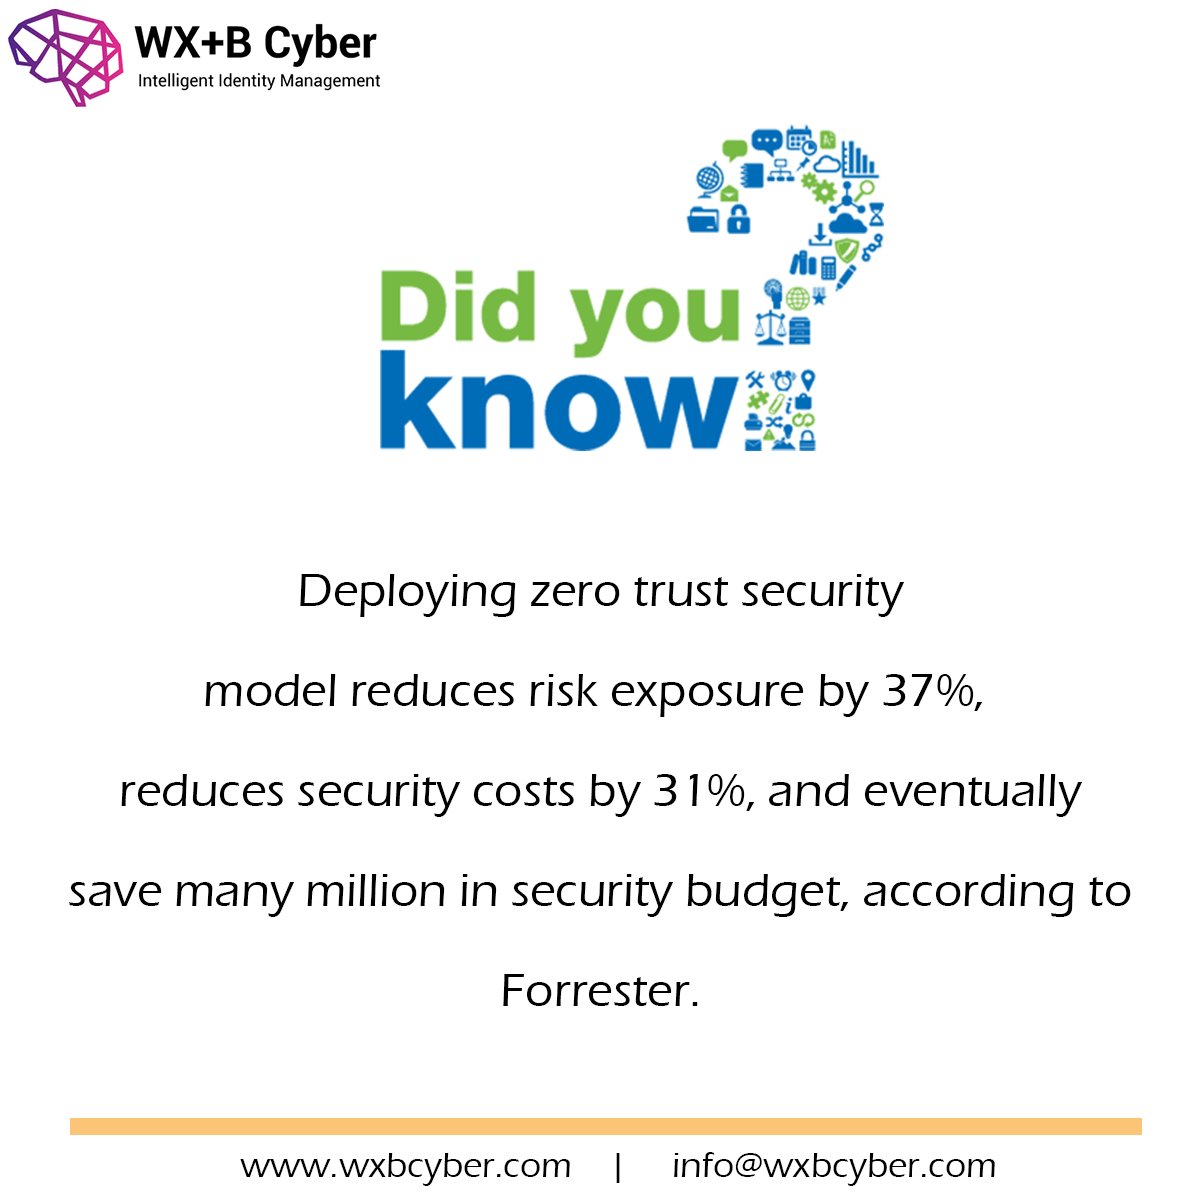 Deploying zero trust #security model reduces risk exposure by 37%, reduces security costs by 31%, and eventually save many million in #securitybudget, according to #Forrester.
#cybersecurity #cyberthreats #cybersecurityawareness 
#dcblackout #PRIDE2020 #MondayMotivation #Virgil